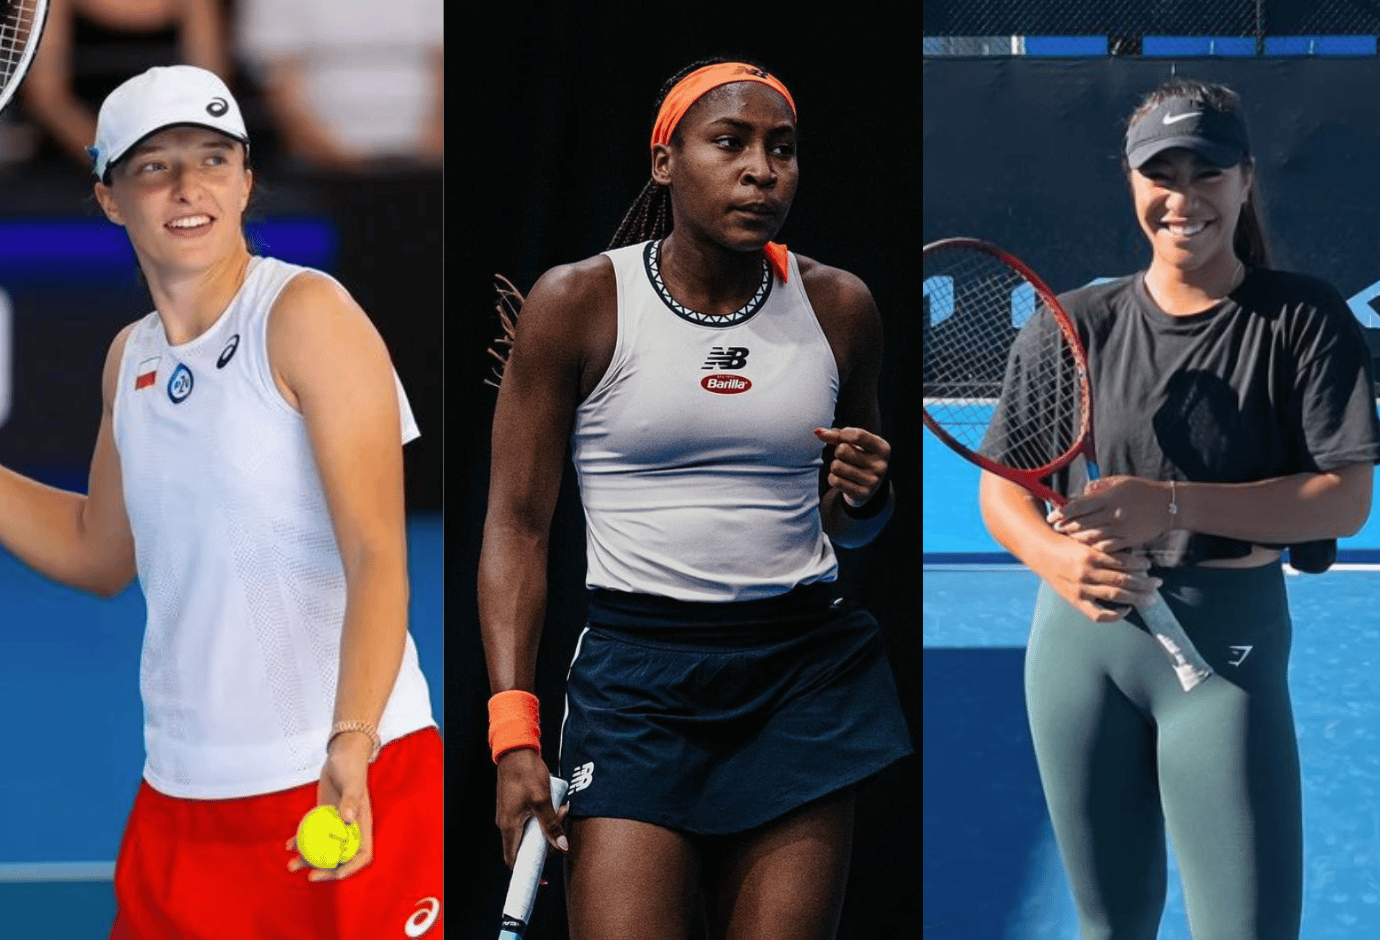 Who-has-made-it-to-the-semifinals-among-the-women-at-the-Australian-Open--40-72.png